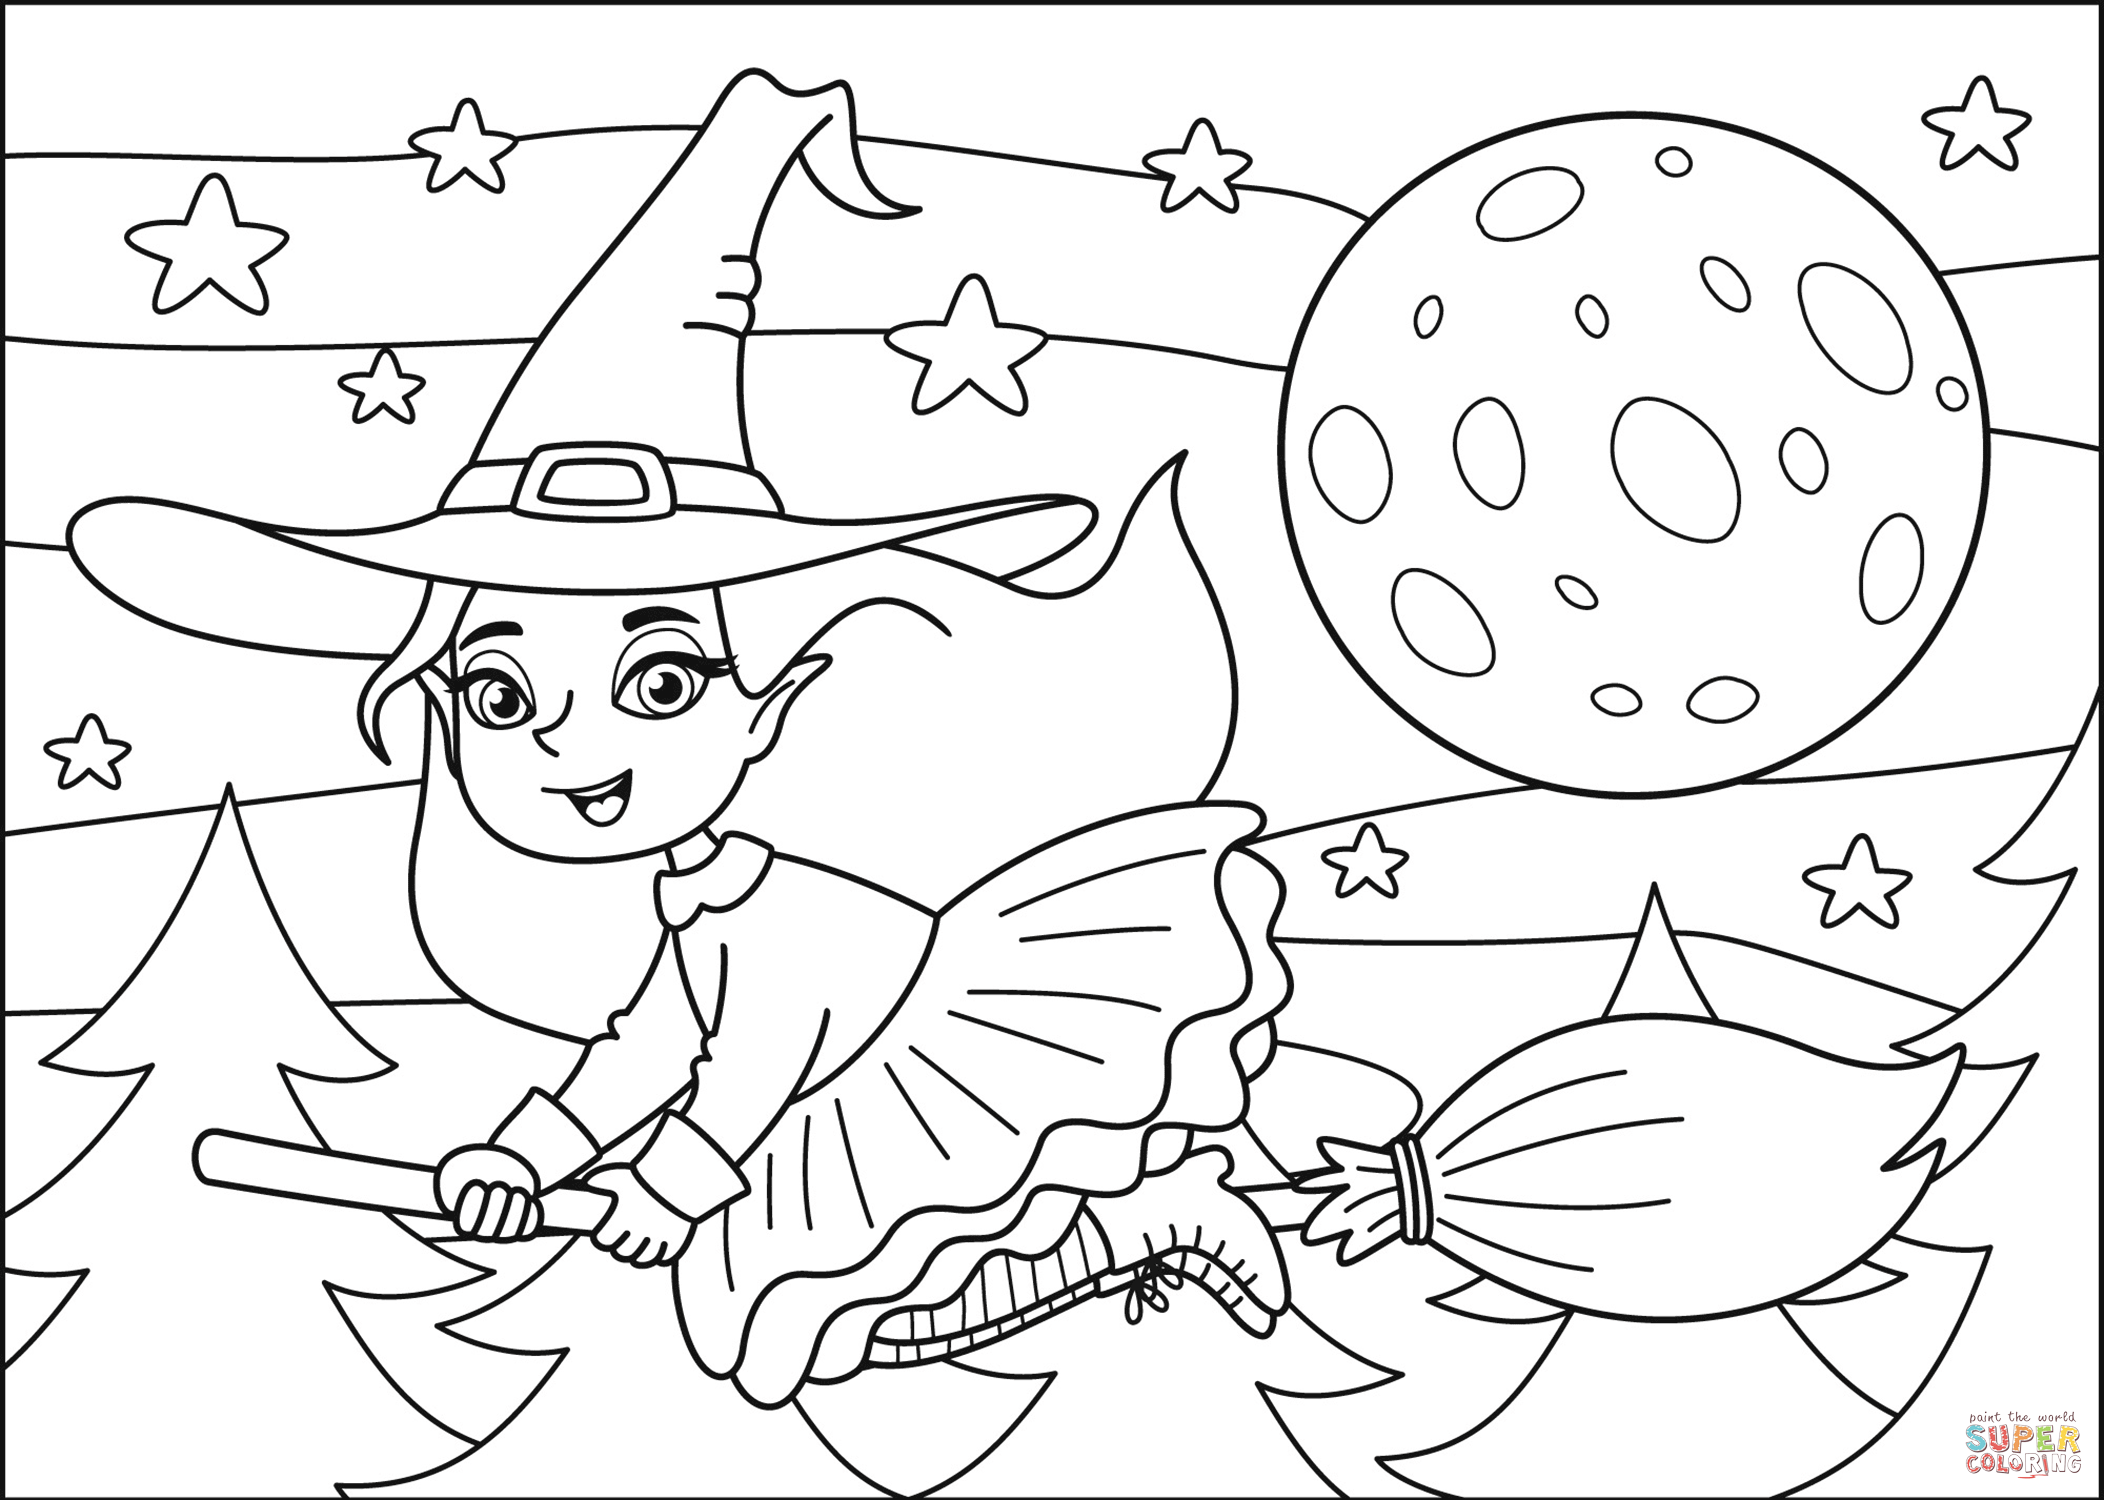 Witch coloring page free printable coloring pages